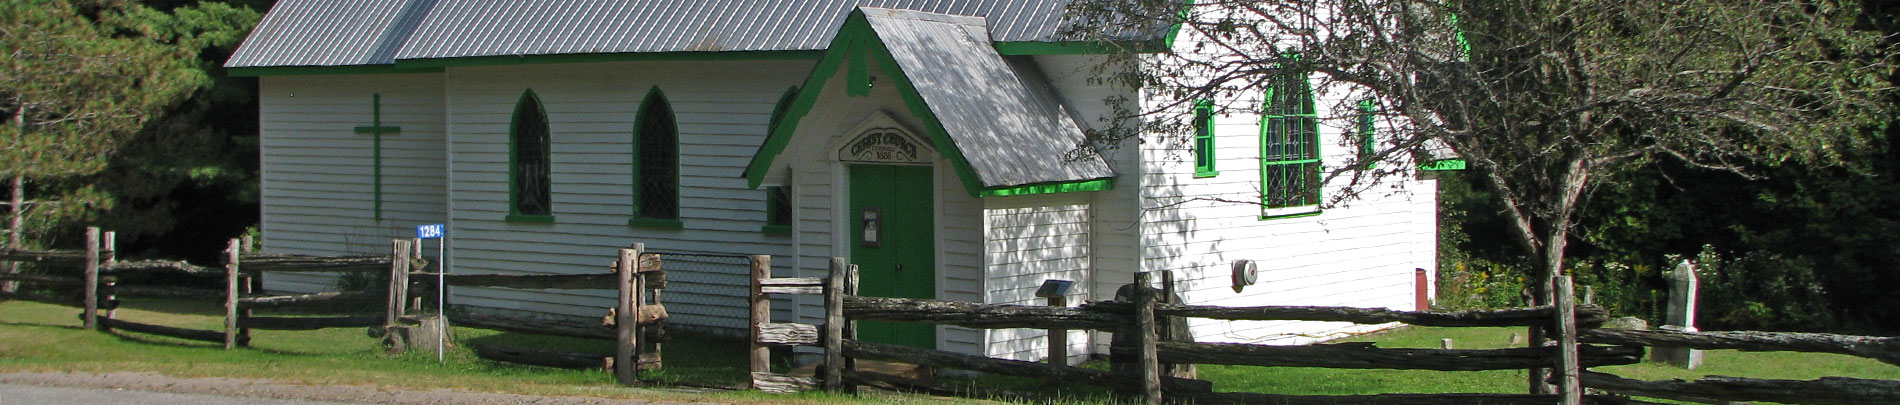 A photo of the exterior of the Essonville Historic Church.